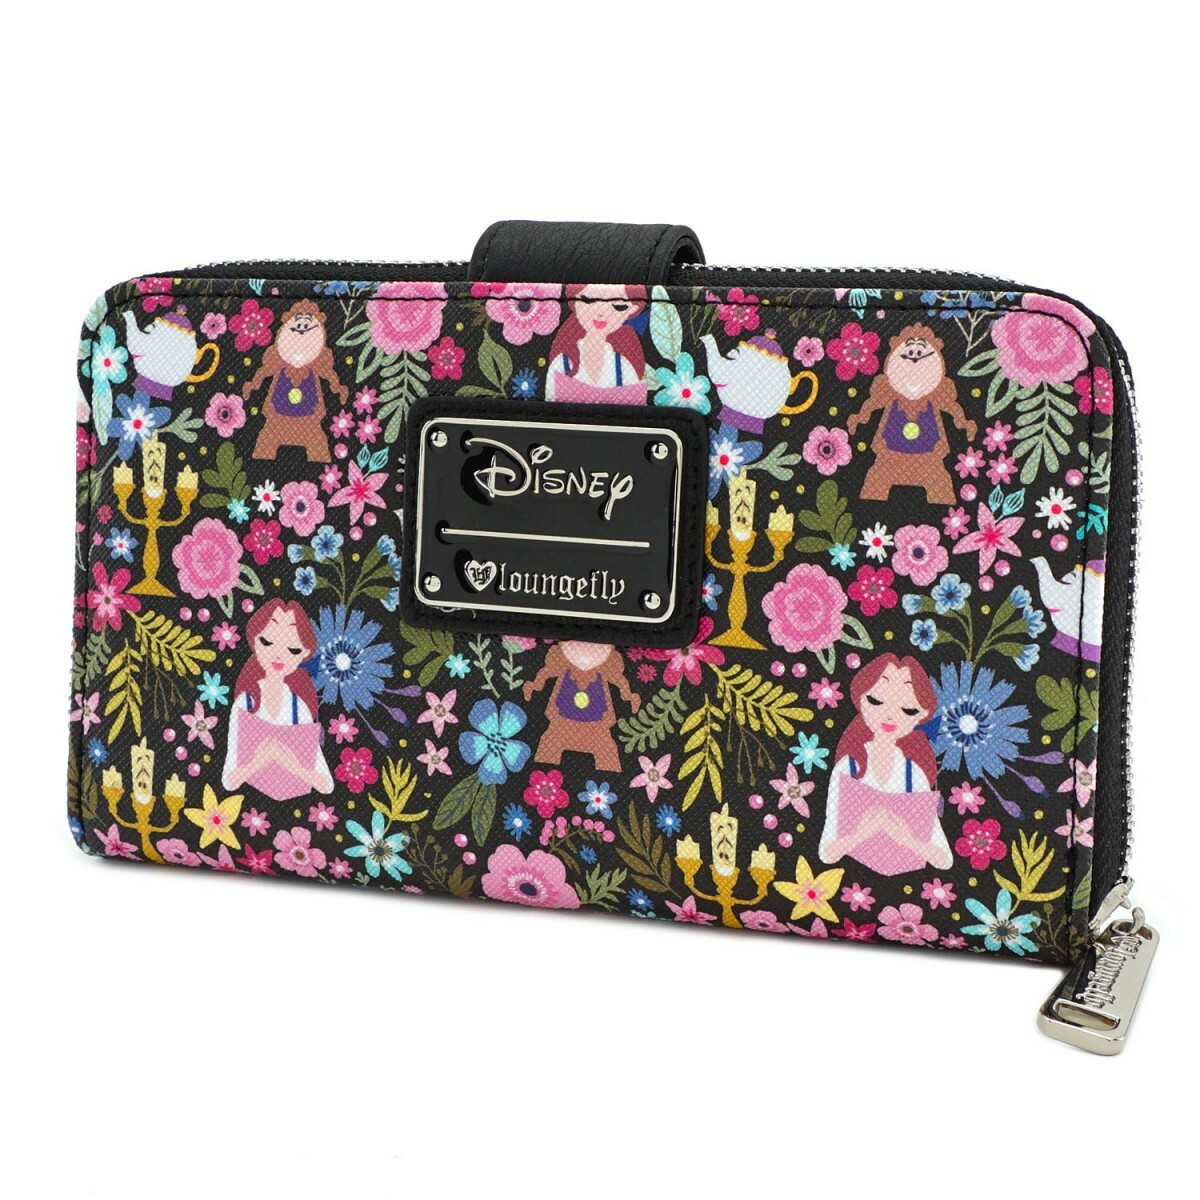 Loungefly Disney Beauty and the Beast Character Floral Print Zip-Around Wallet